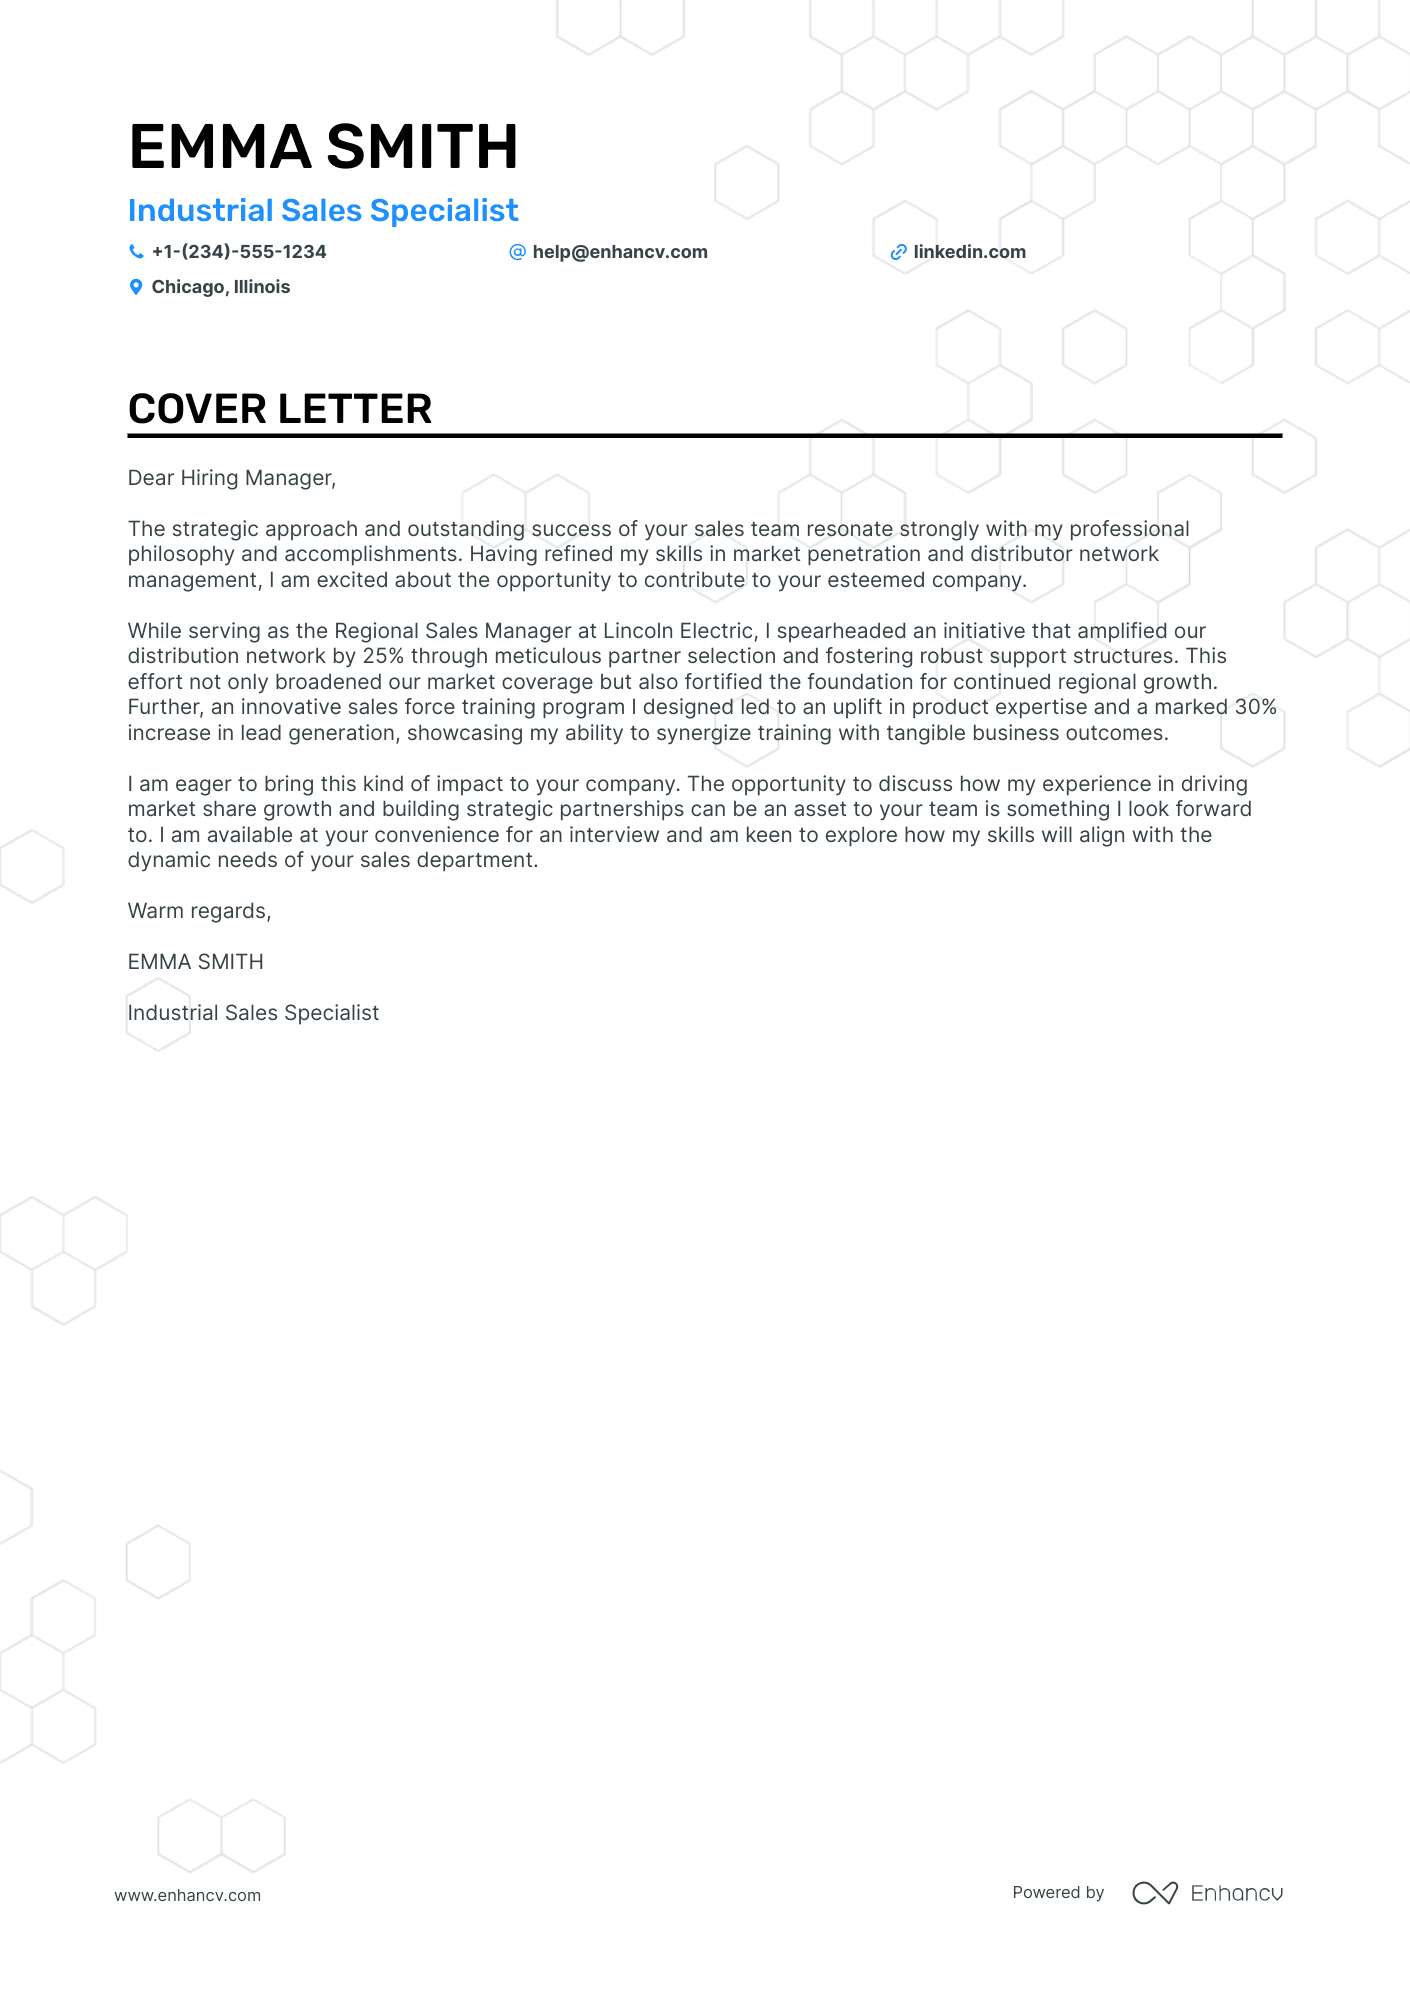 job cover letter for sales manager